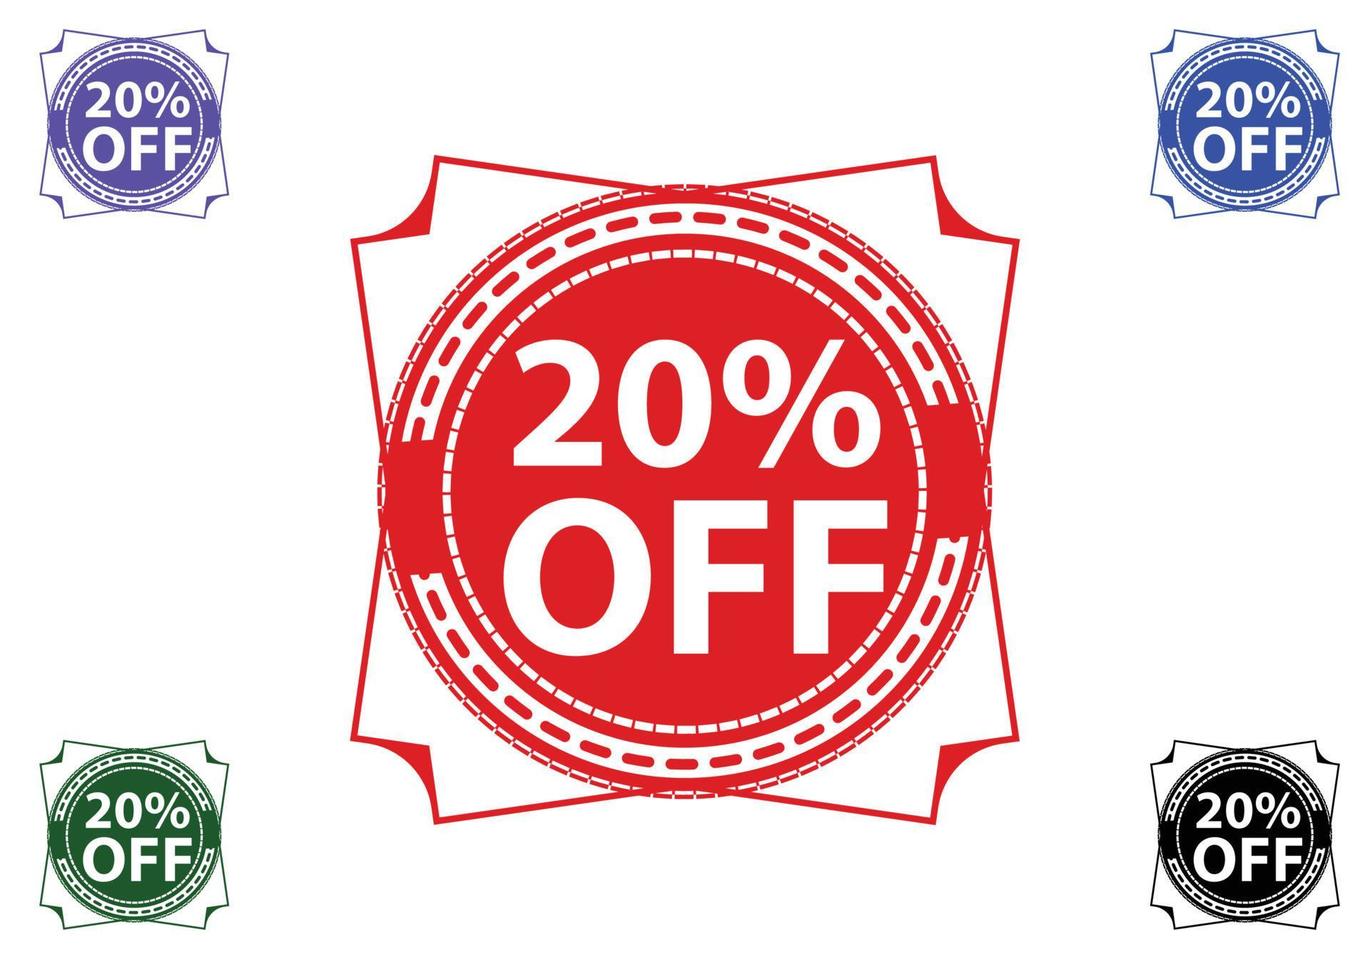 20 percent off new offer logo and icon design vector